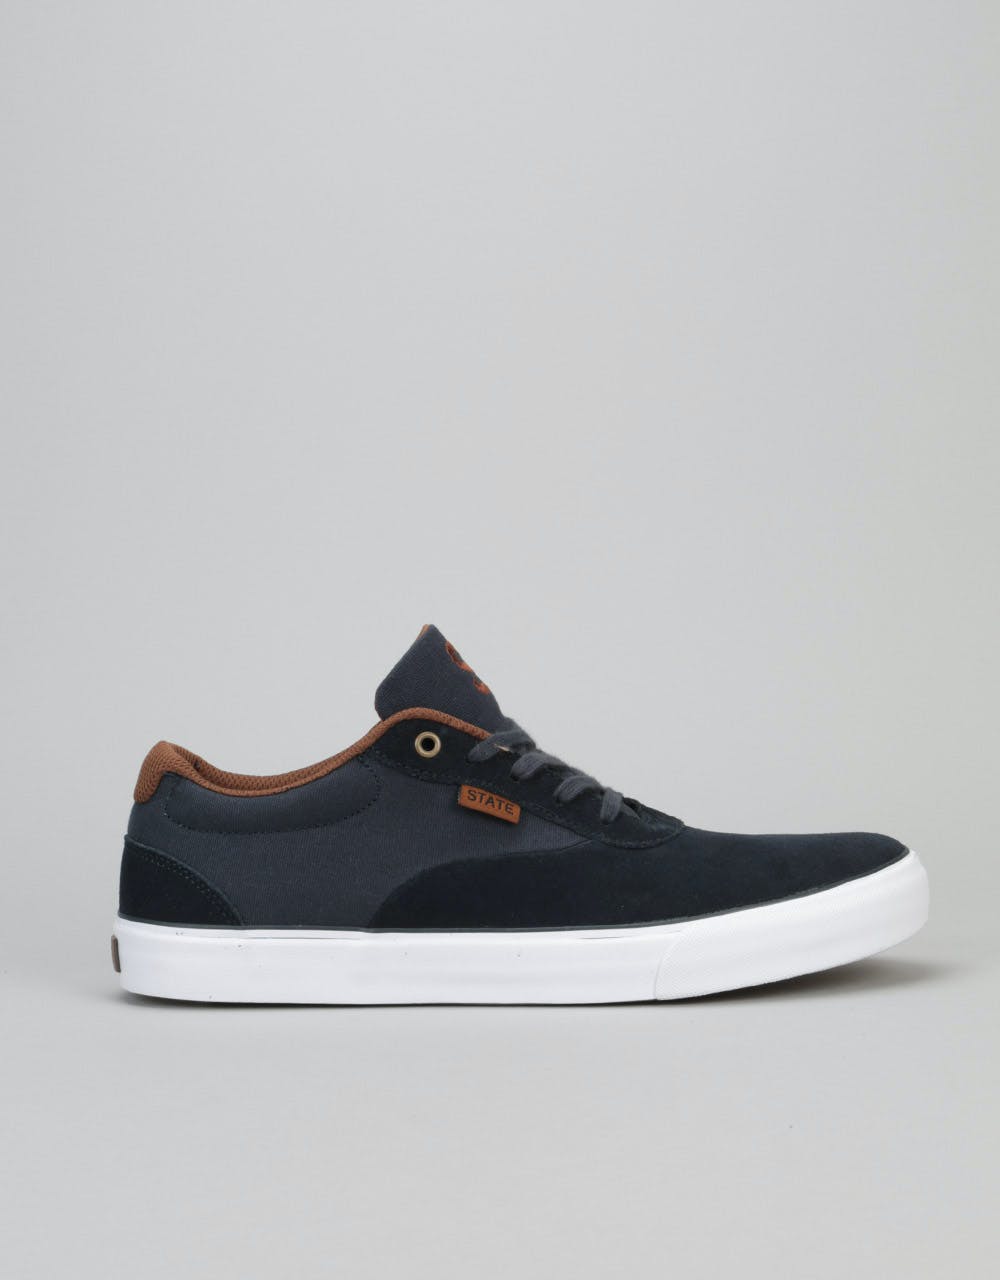 State Madison Skate Shoes - Navy/Brown Suede/Canvas